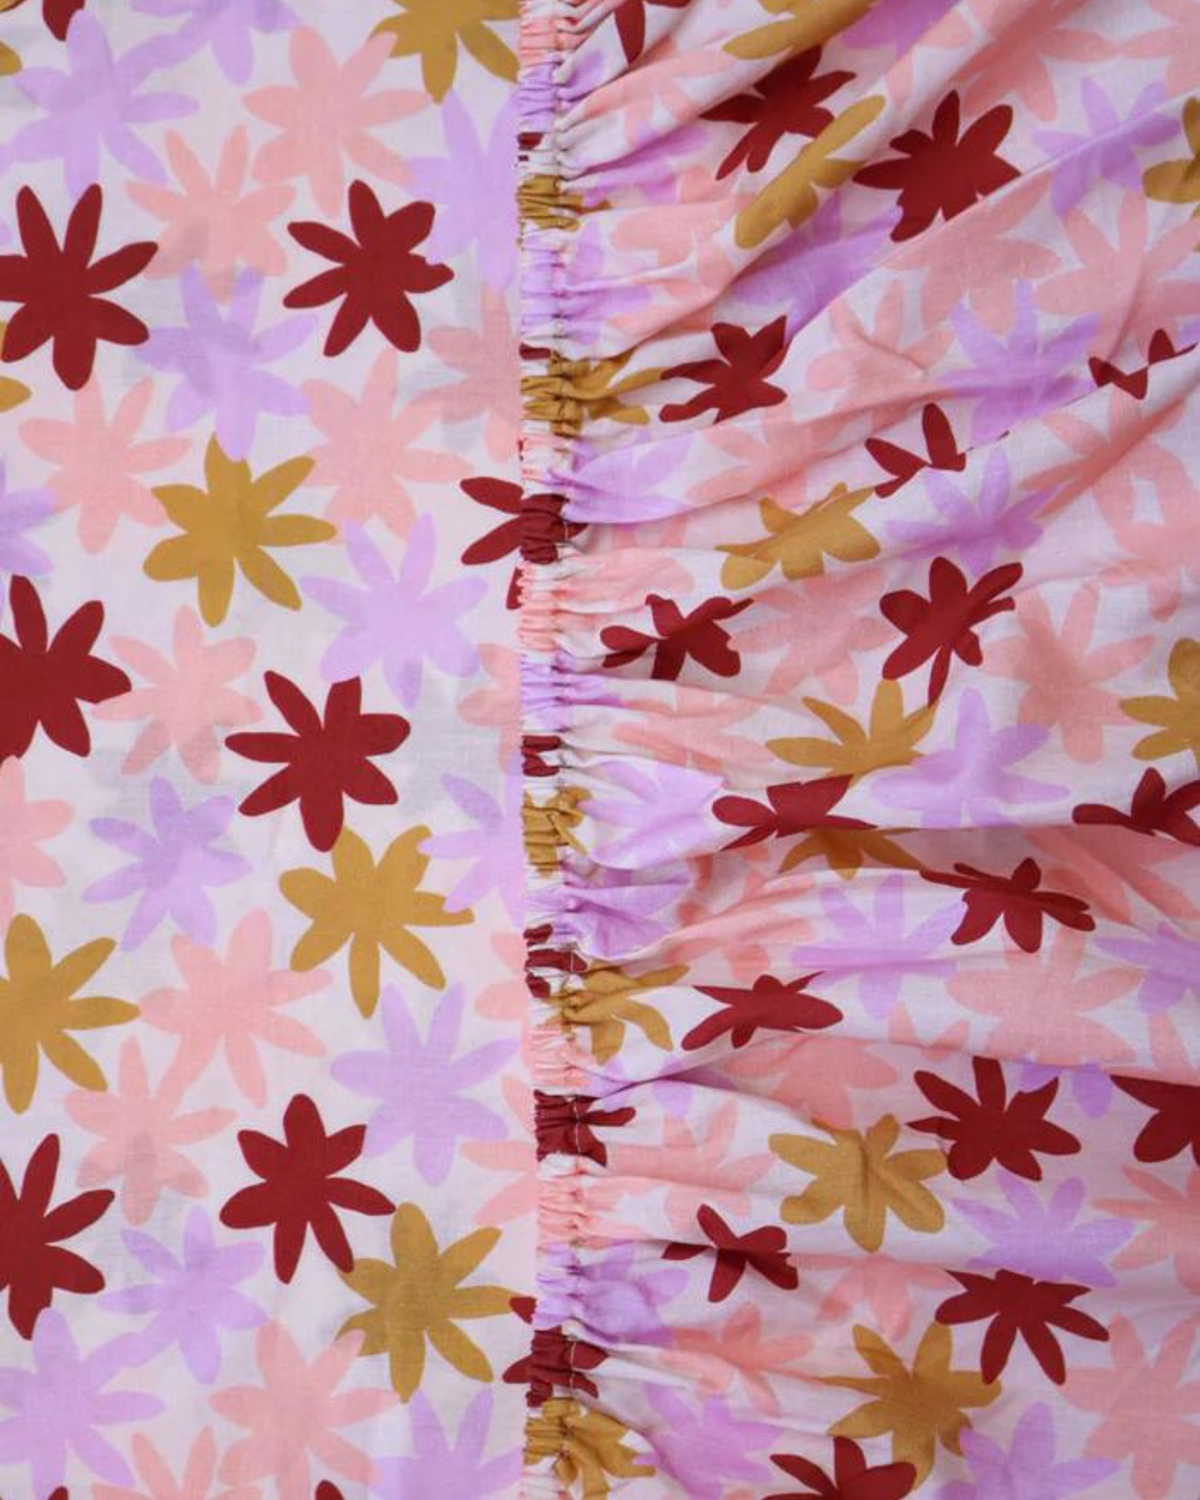 Your kids will sleep soundly on this gorgeous Peach Floral Fitted Sheet. Made from 100% combed cotton percale for a soft texture, this sheet features a graphic floral pattern in a palette of burgundy, soft lilac, sweet peach and warm caramel.